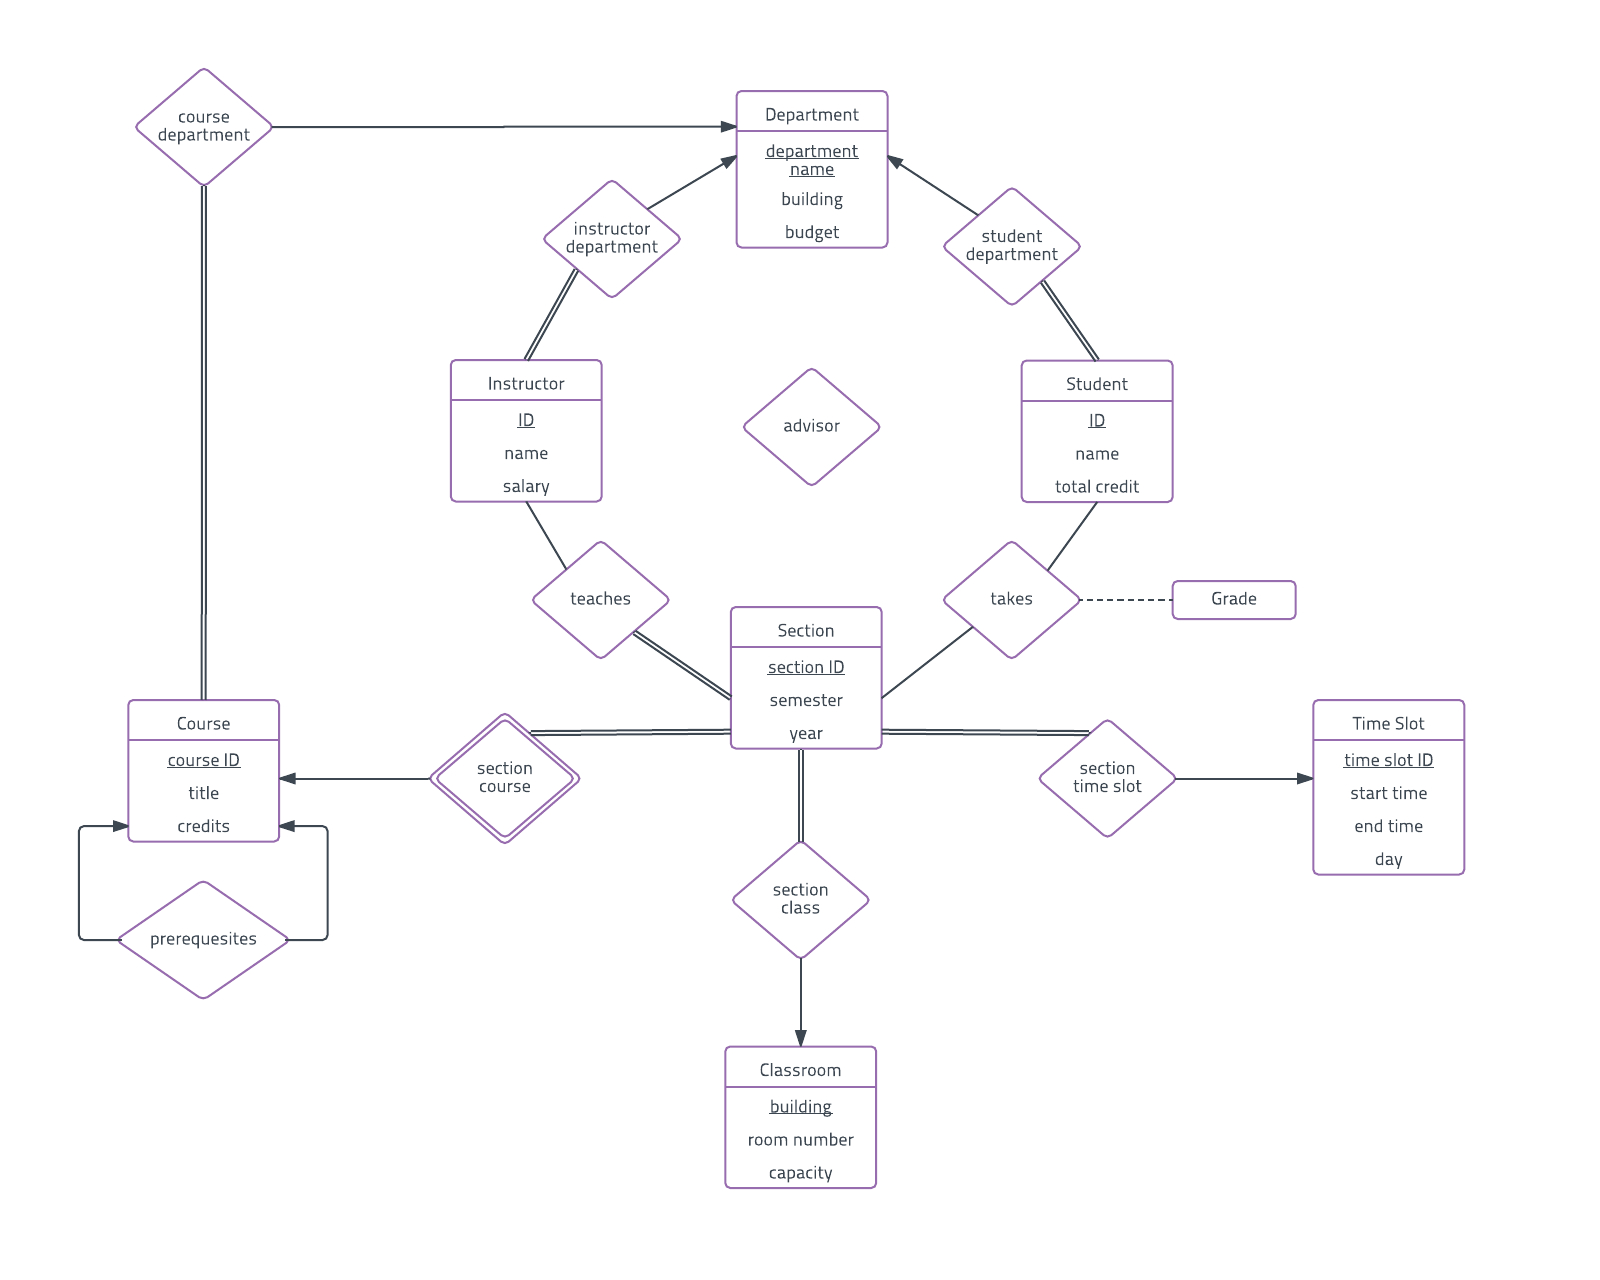 Er Diagram Examples And Templates | Lucidchart in Er Diagram Examples With Explanation